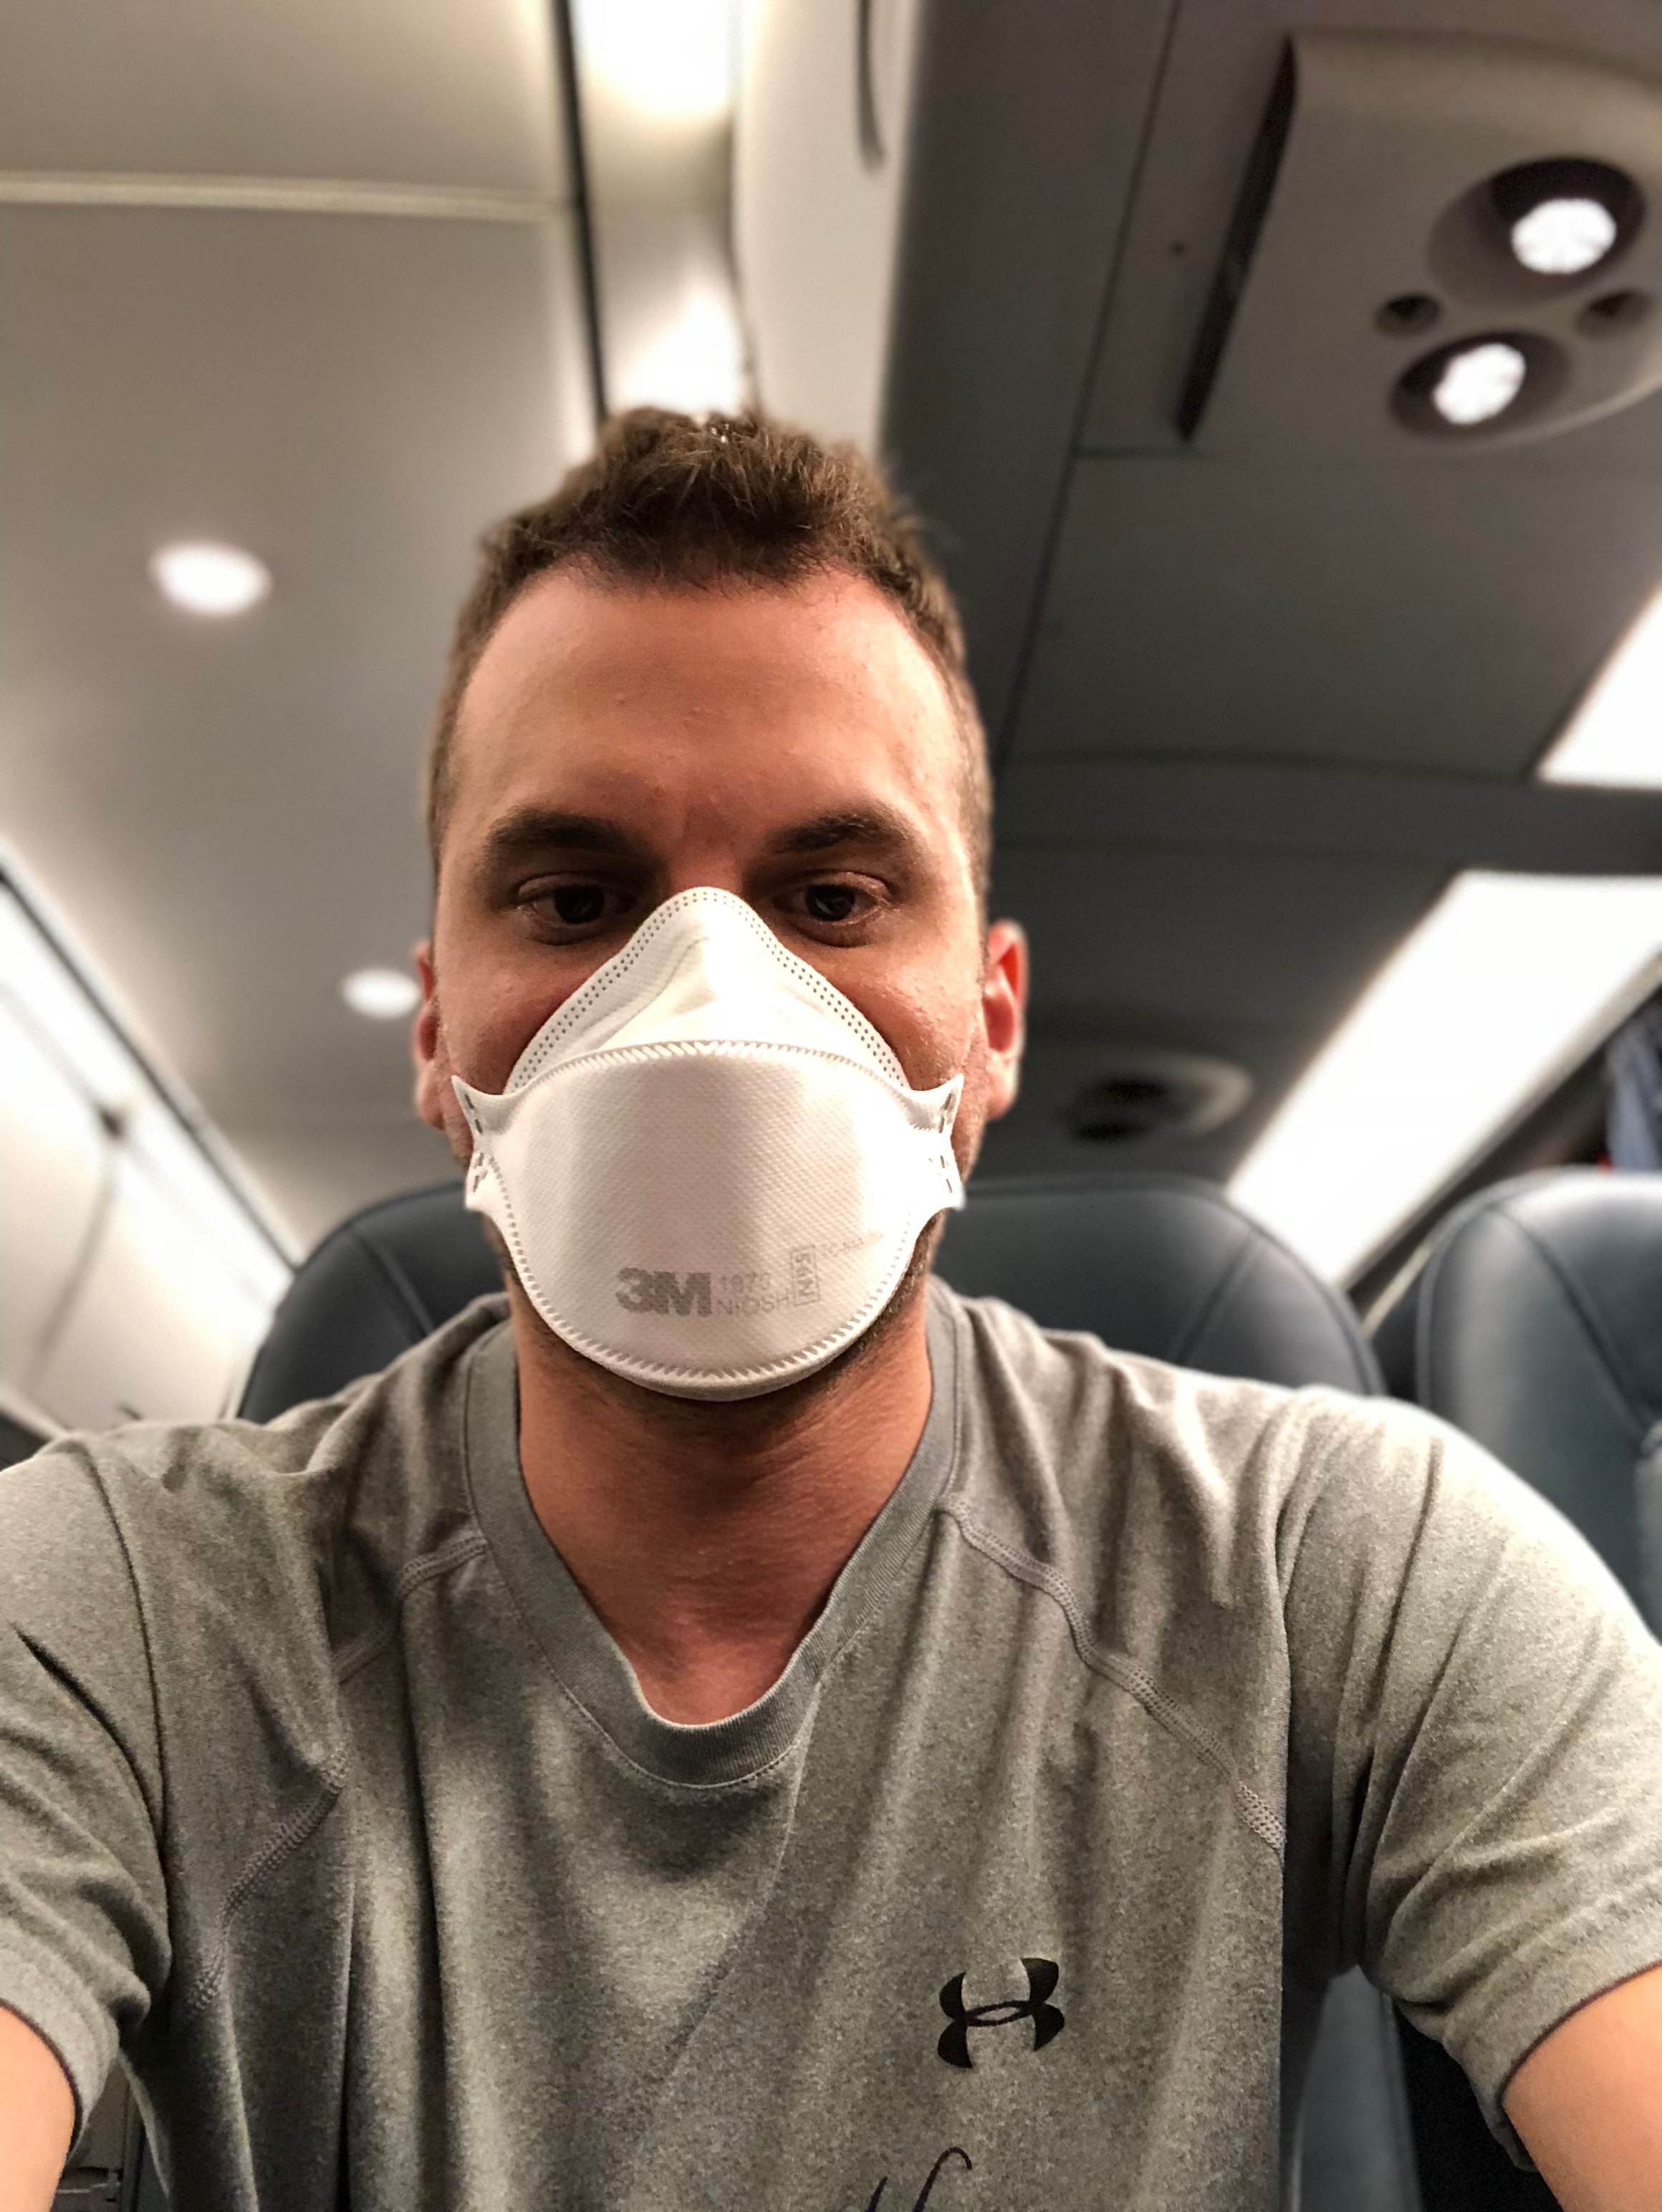 Don’t Fall Victim To Aggressive Marketing Campaigns, Reusable Masks Are NOT Appropriate for Cystic Fibrosis Patients